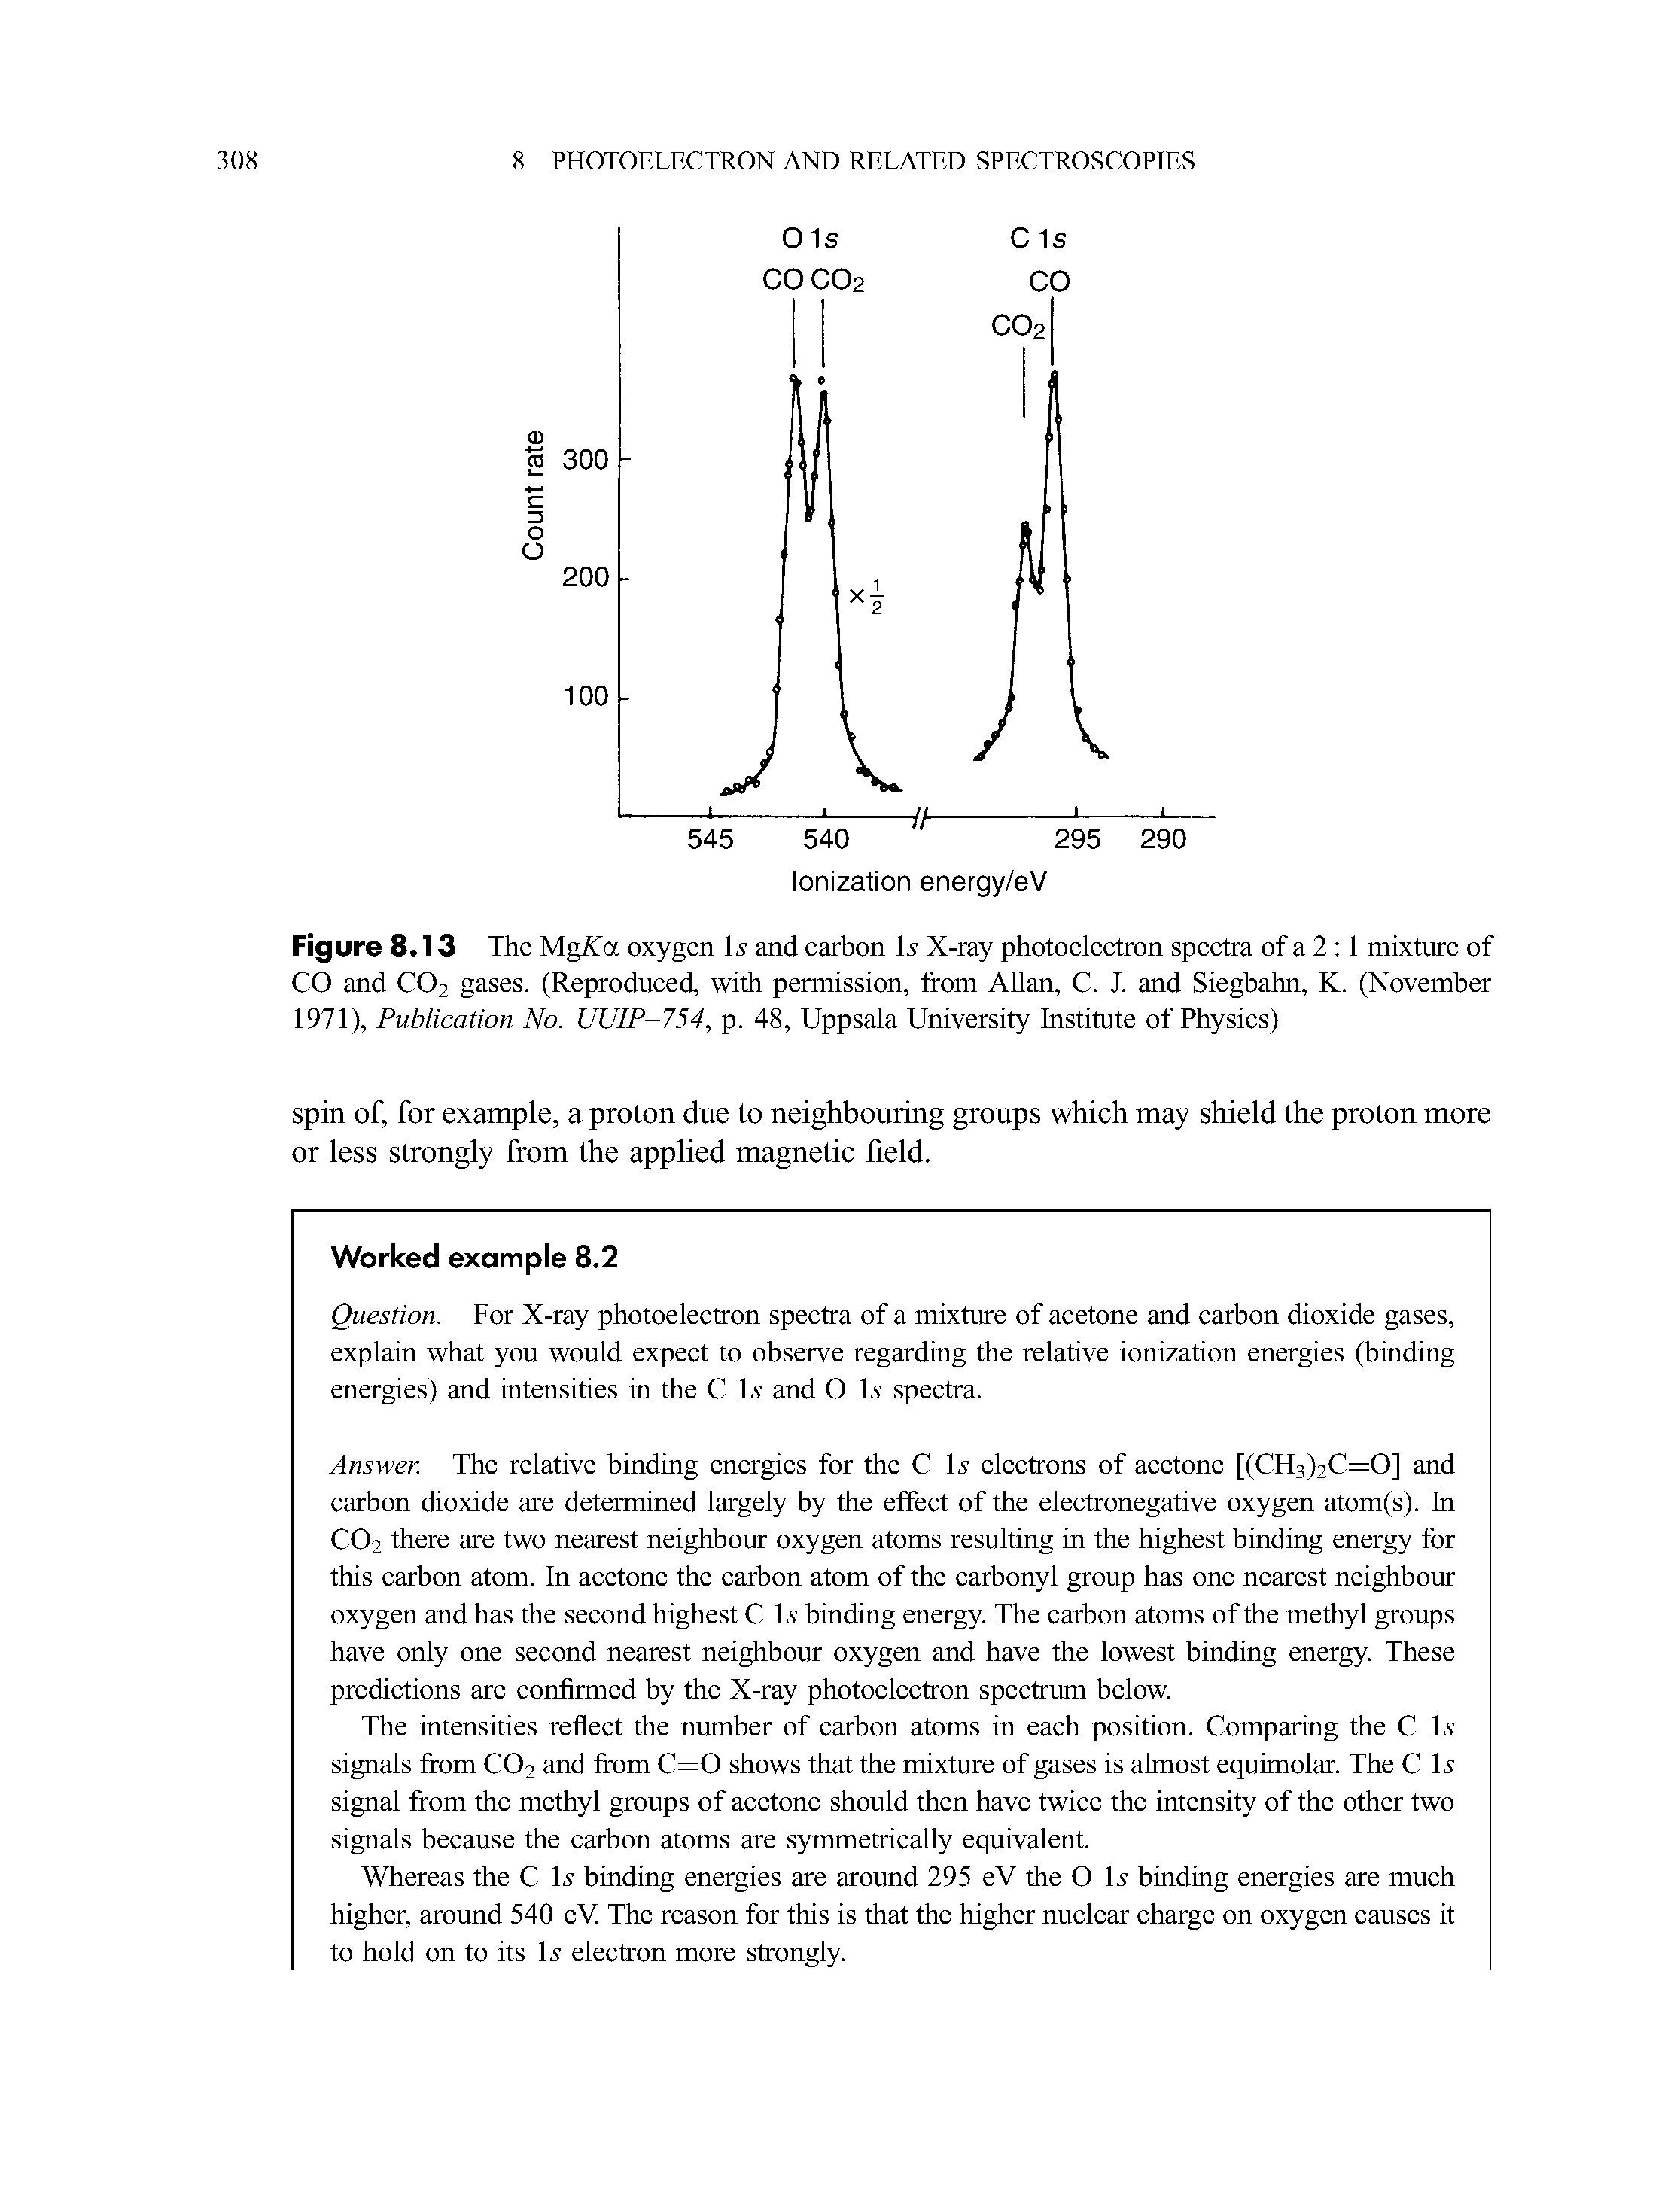 Figure 8.13 The MgATa oxygen Is and carbon Is X-ray photoelectron spectra of a 2 1 mixture of CO and CO2 gases. (Reproduced, with permission, from Allan, C. J. and Siegbahn, K. (November 1971), Publication No. UUIP-754, p. 48, Uppsala University Institute of Physics)...